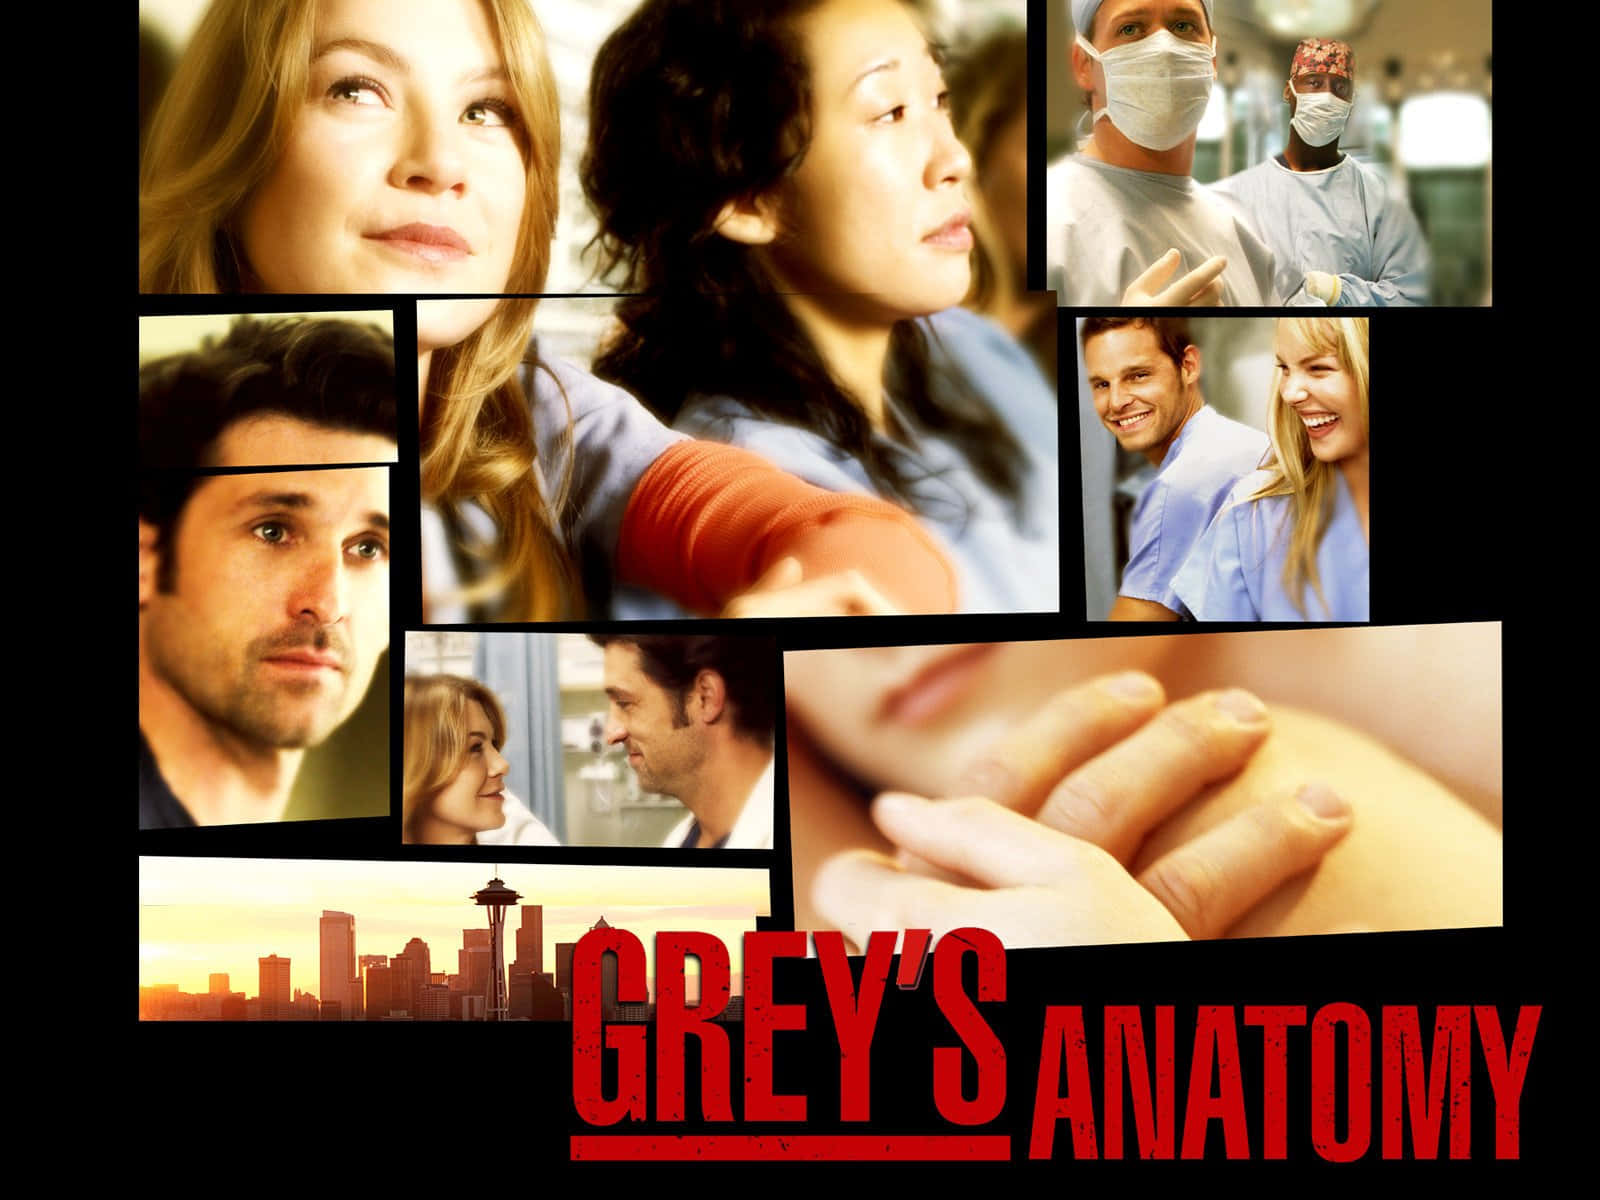 Unforgettable Moments From Grey's Anatomy